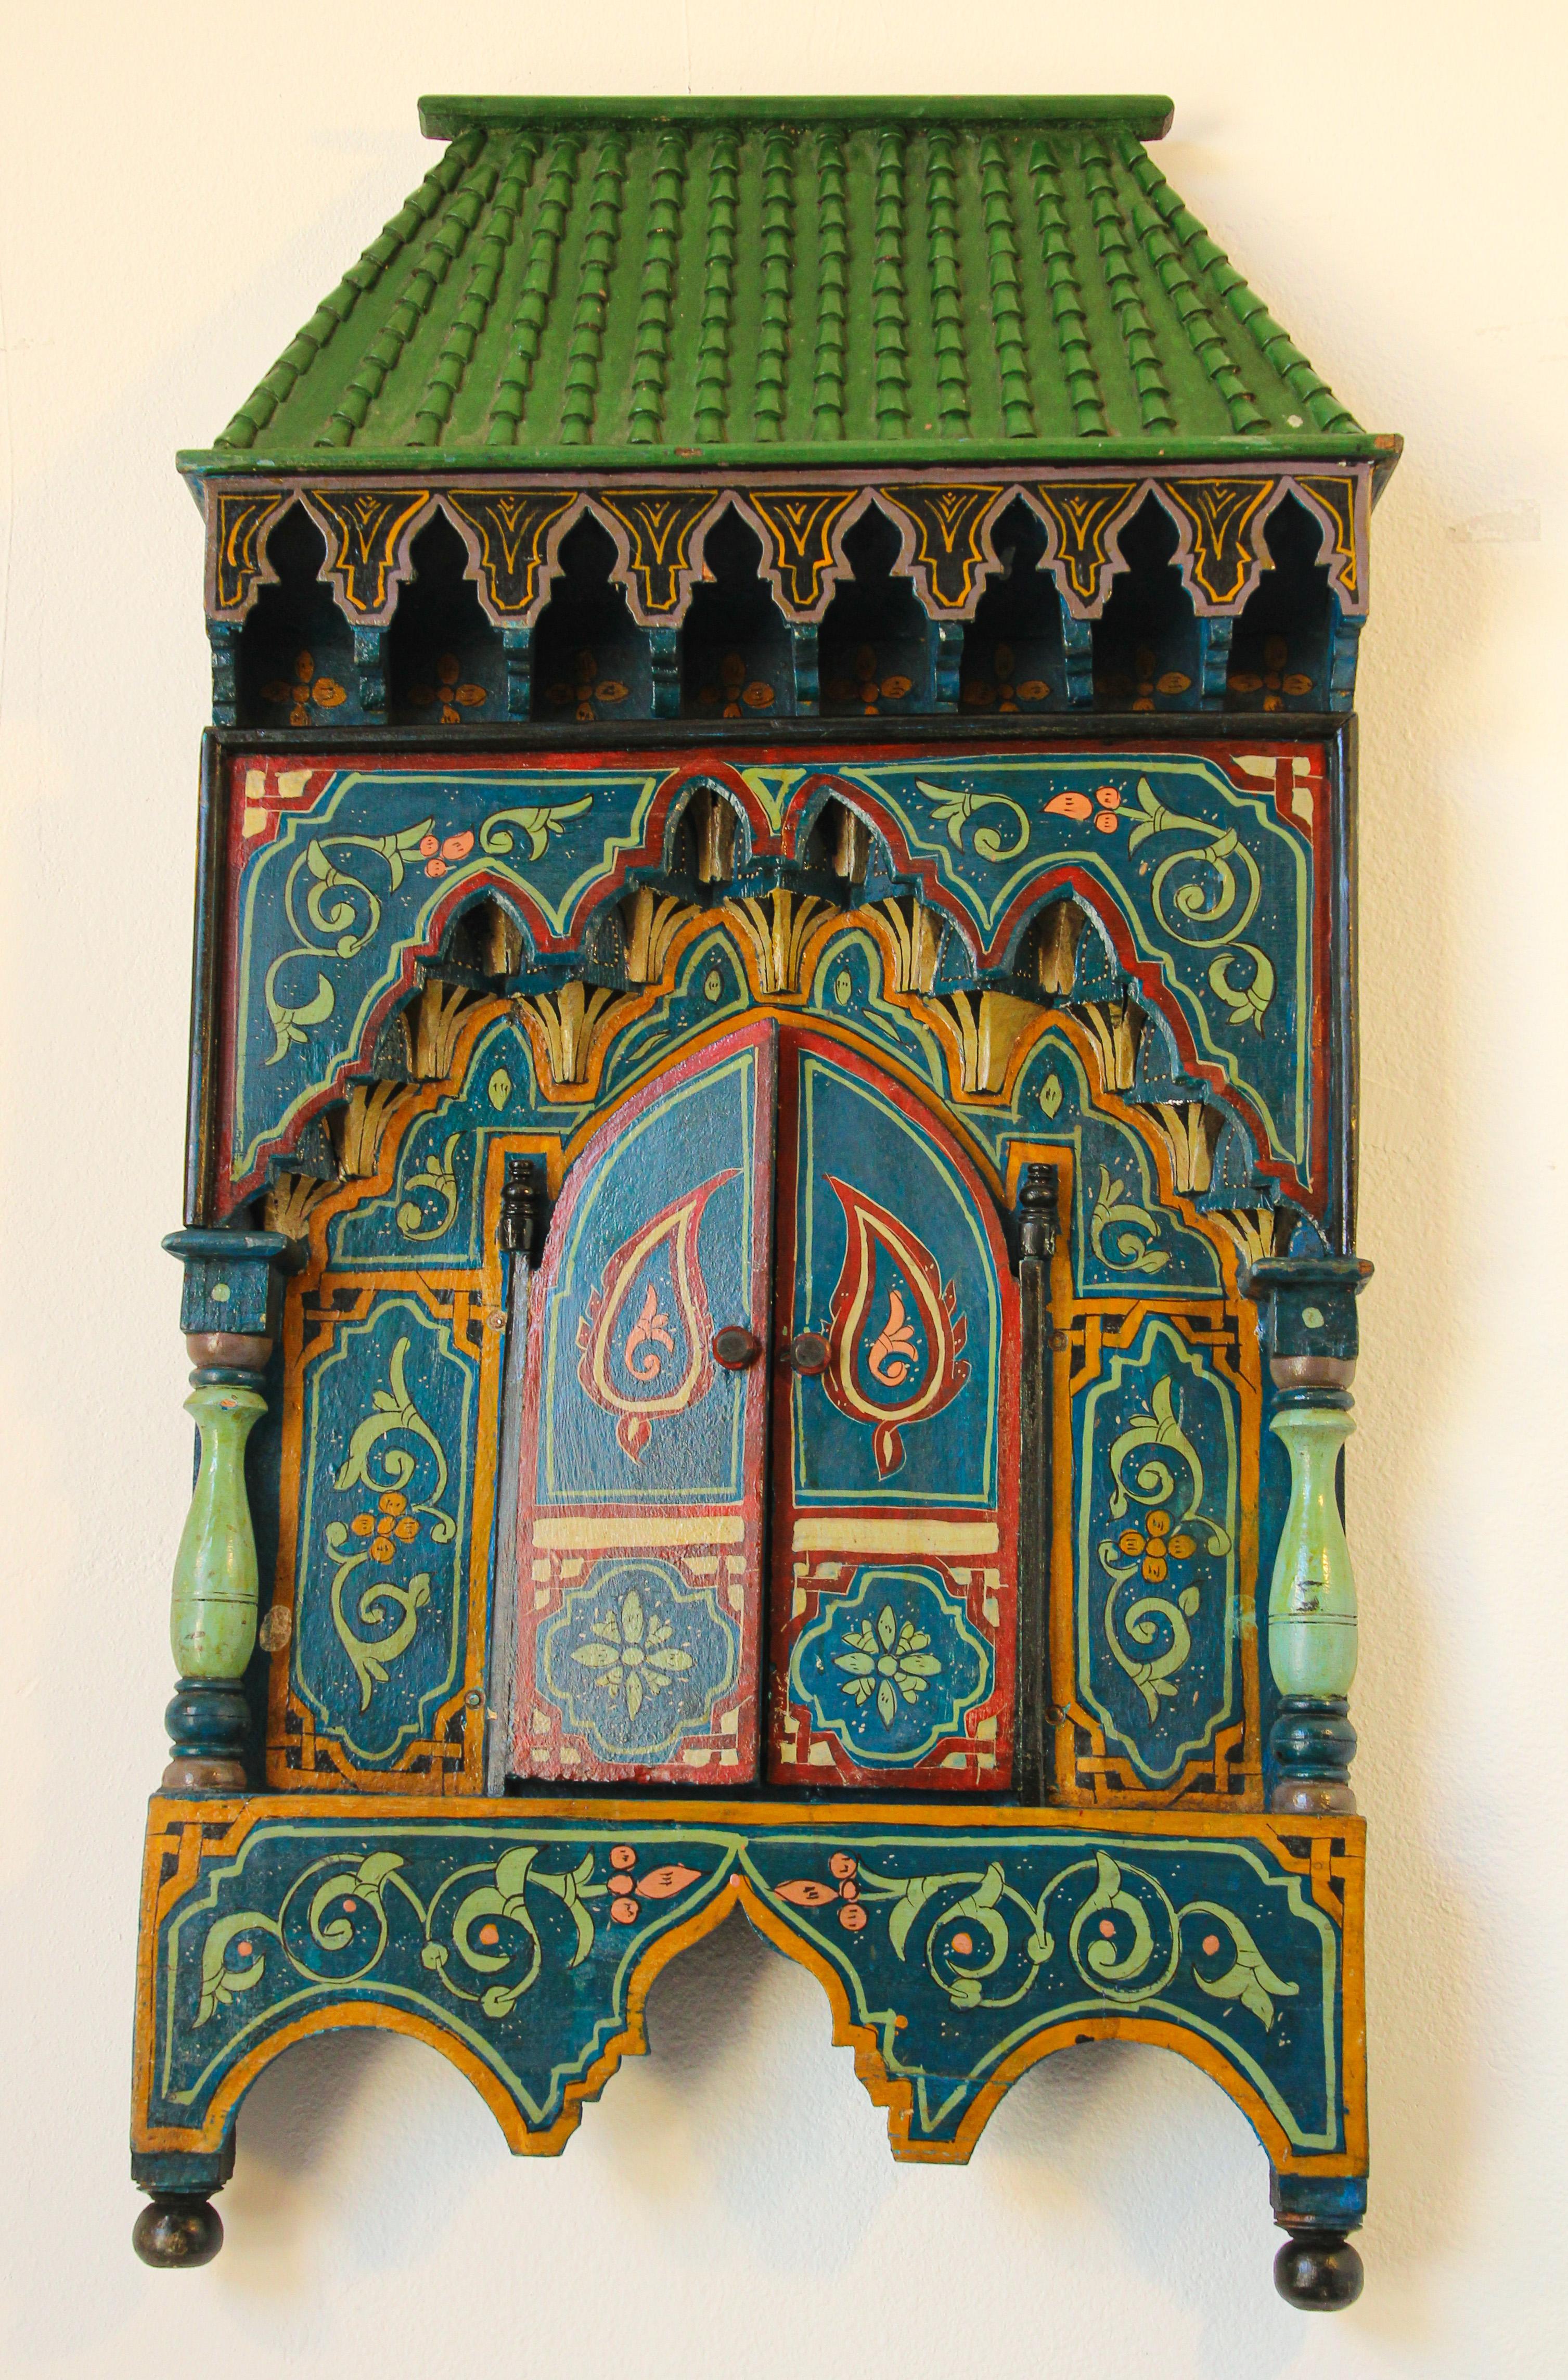 Vintage Moroccan mirror, hand painted, wooden window shaped mirror.
Beautiful hand crafted mirror in a traditional hand painted Moorish detailed design with elaborate arabesque, ornamental, intertwined flowing lines, great colors in dark green,